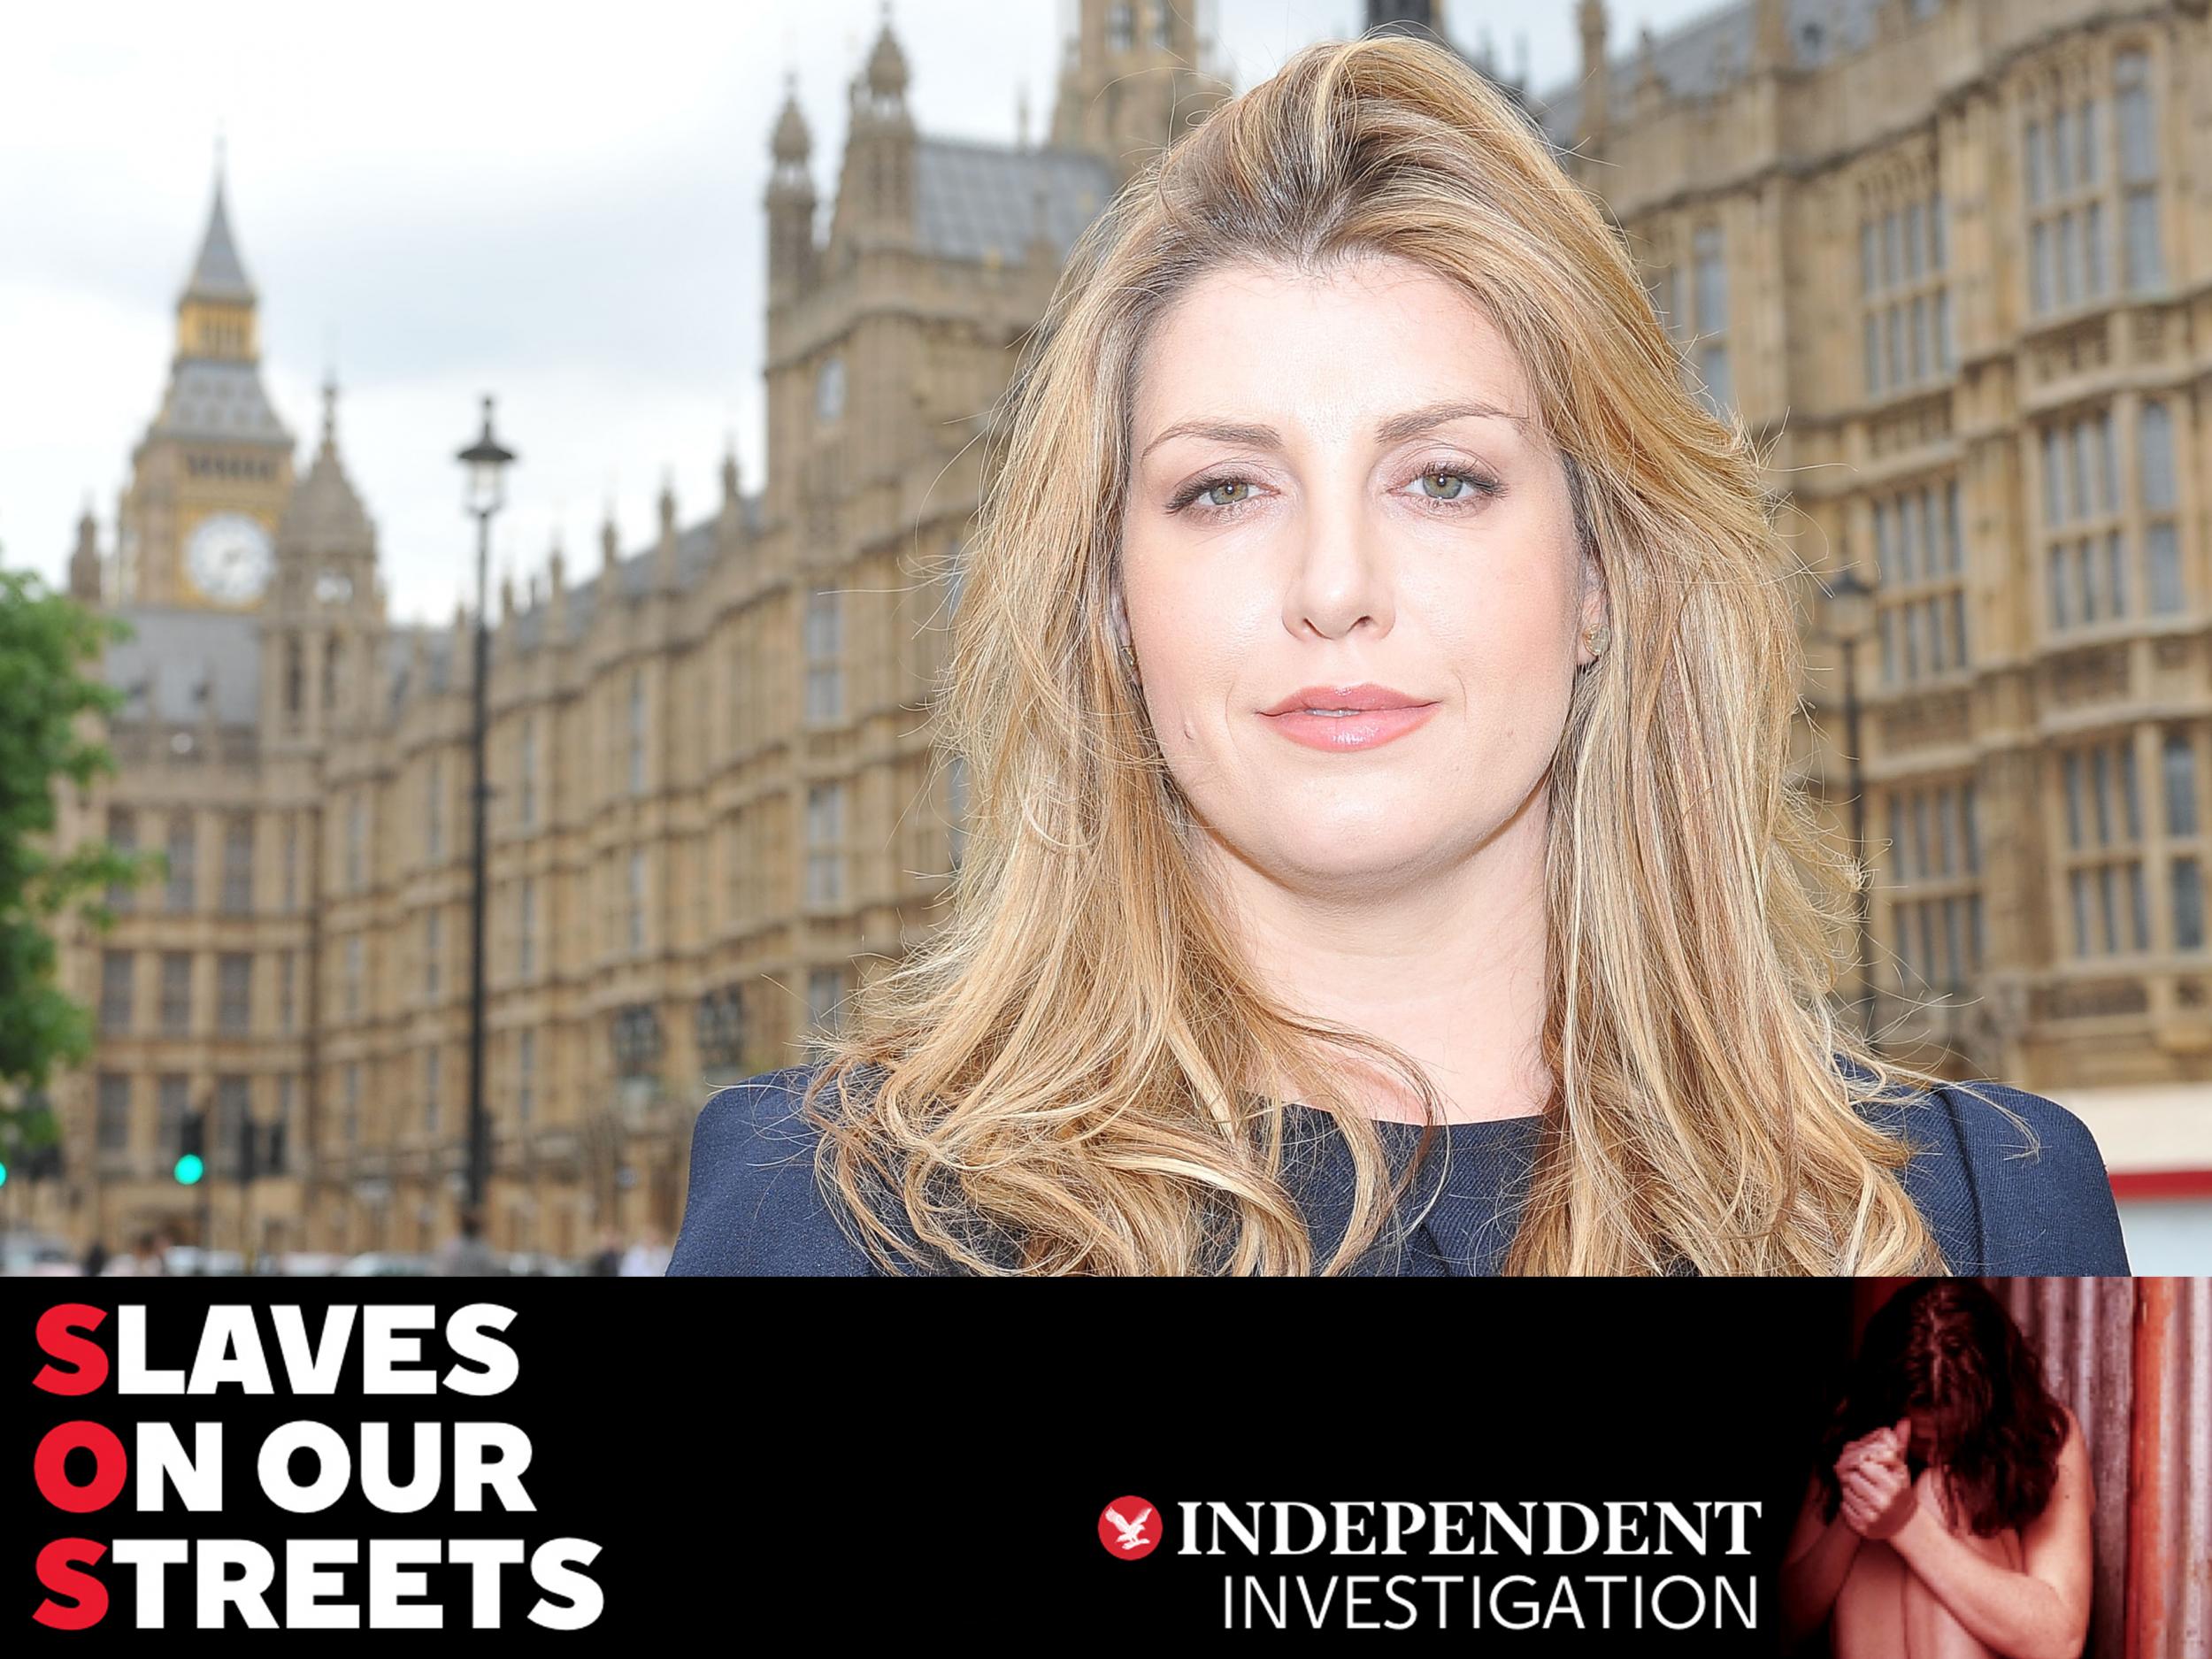 Ahead of the International Day for the Abolition of Slavery on Saturday, Penny Mordaunt says not enough is being done to tackle people-trafficking